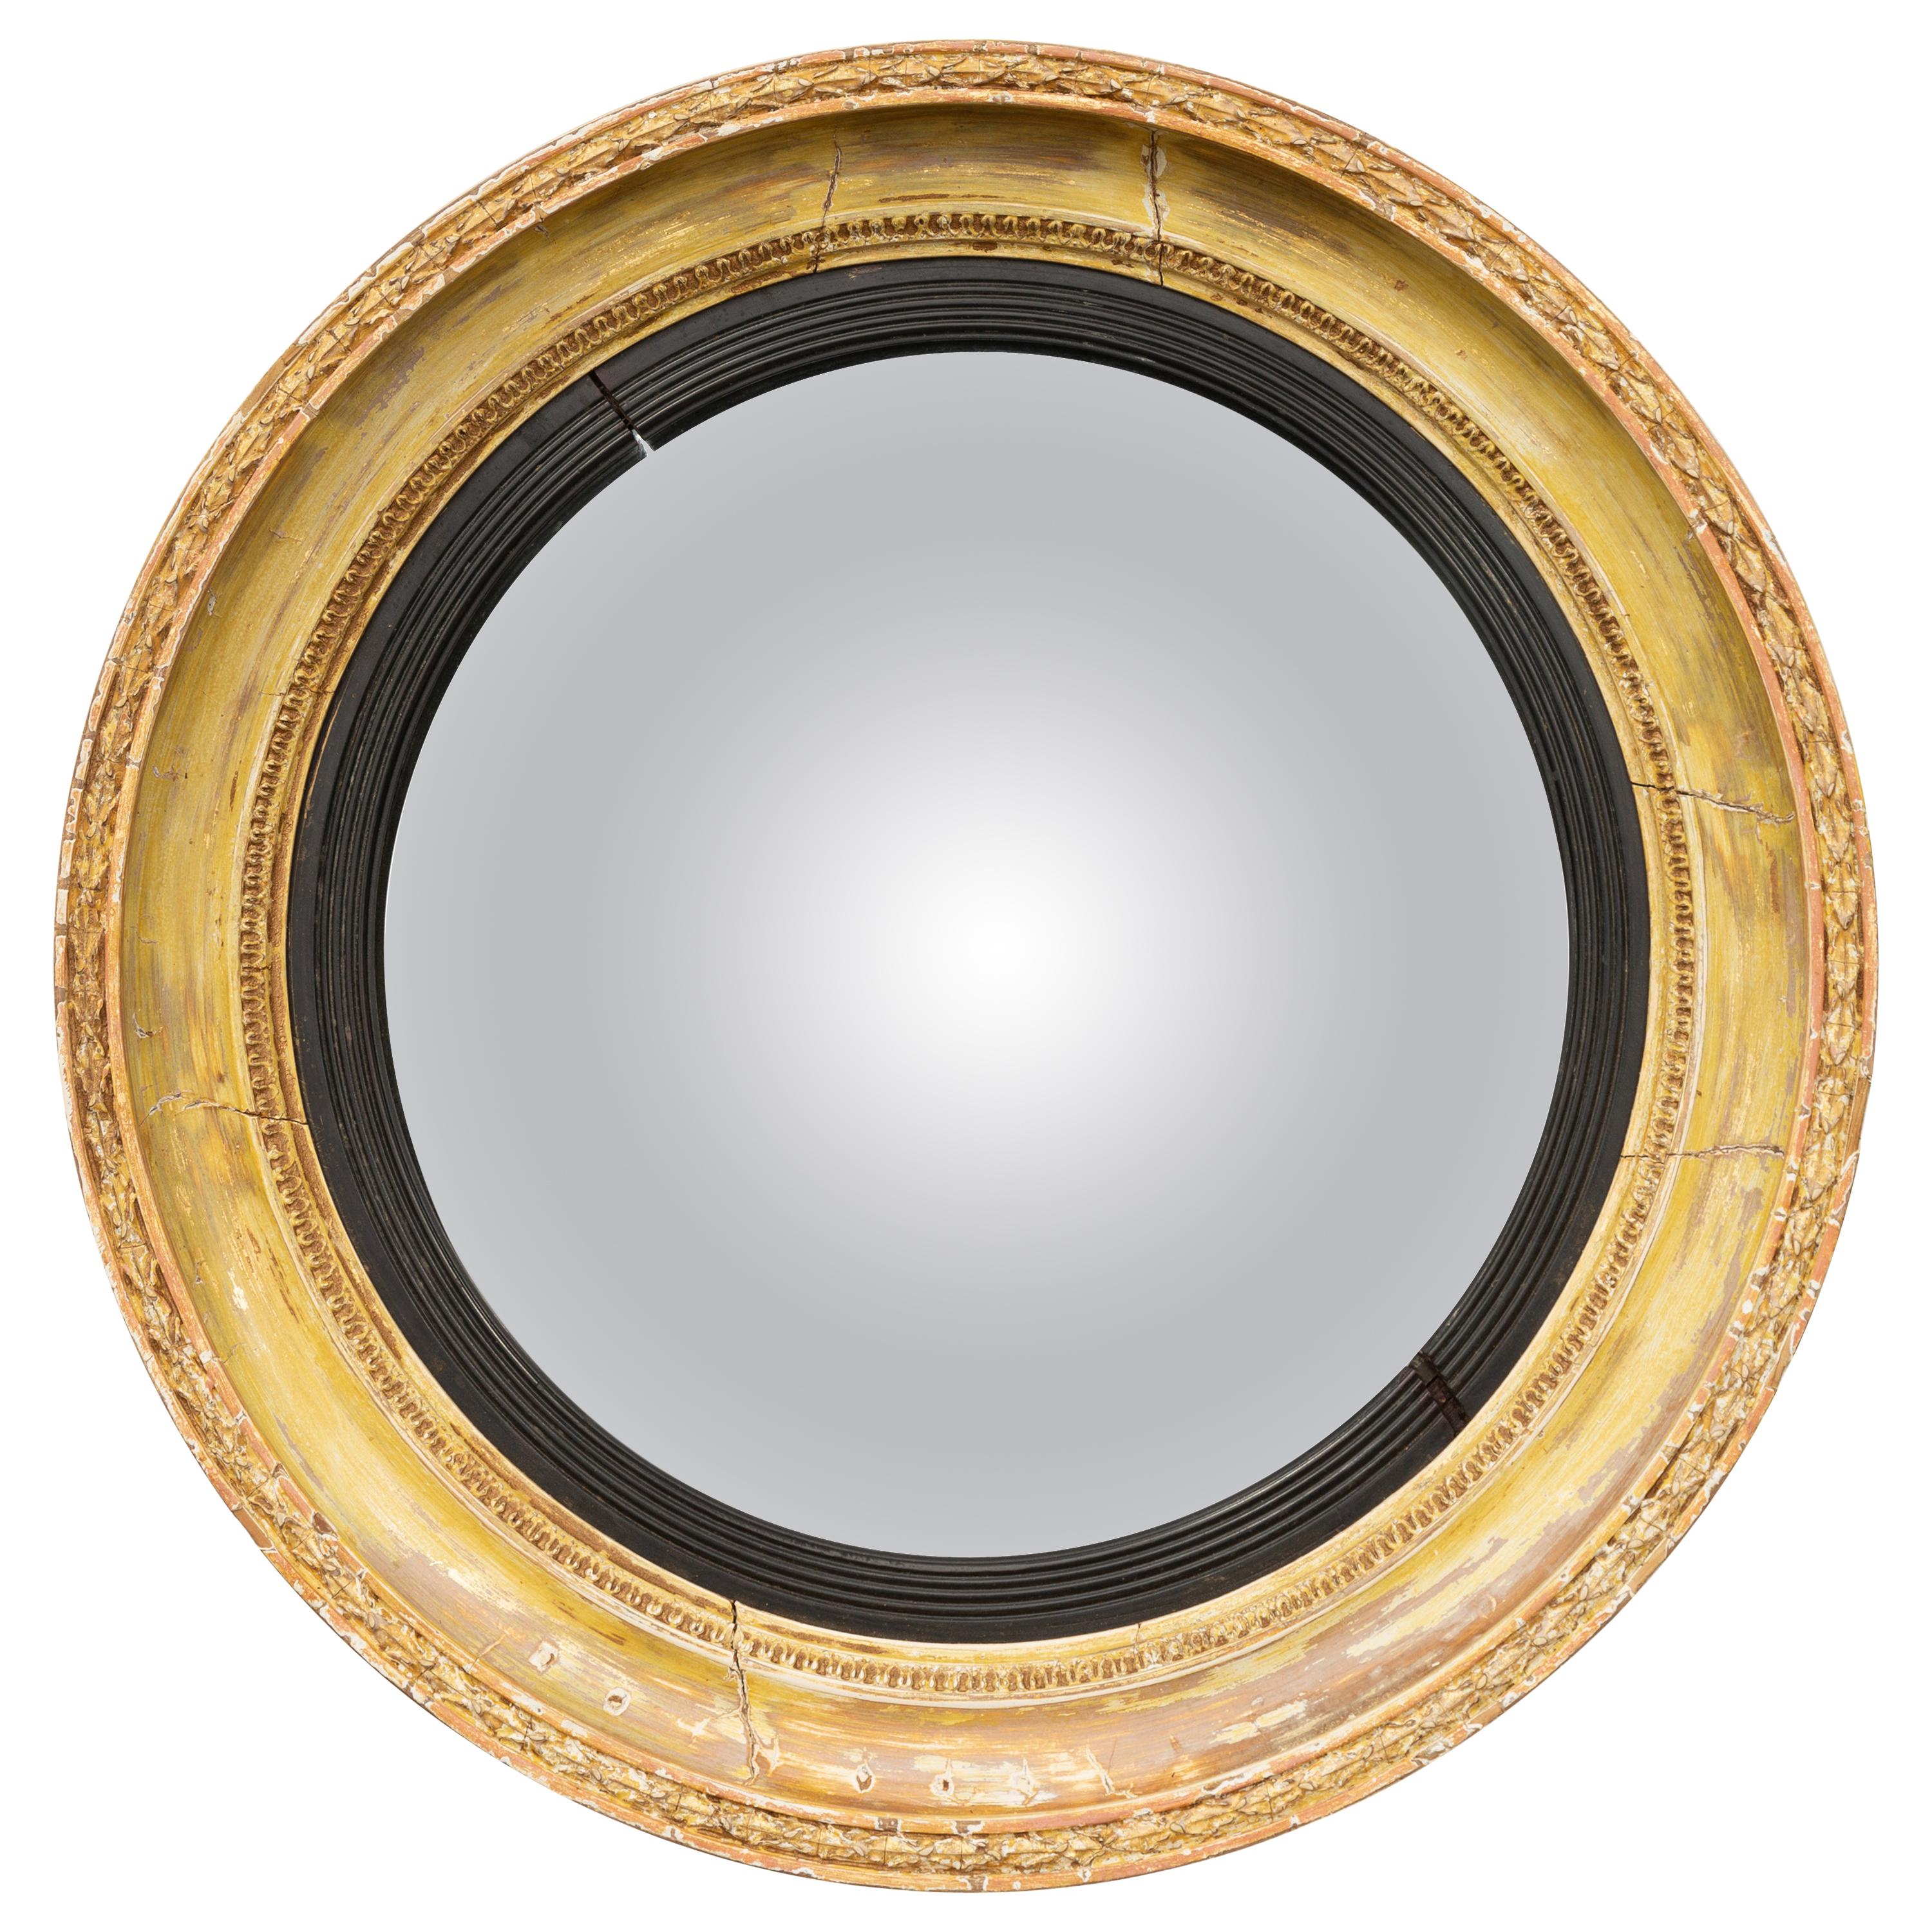 English 1870s Distressed Wood Convex Bullseye Mirror with Ebonized Accents